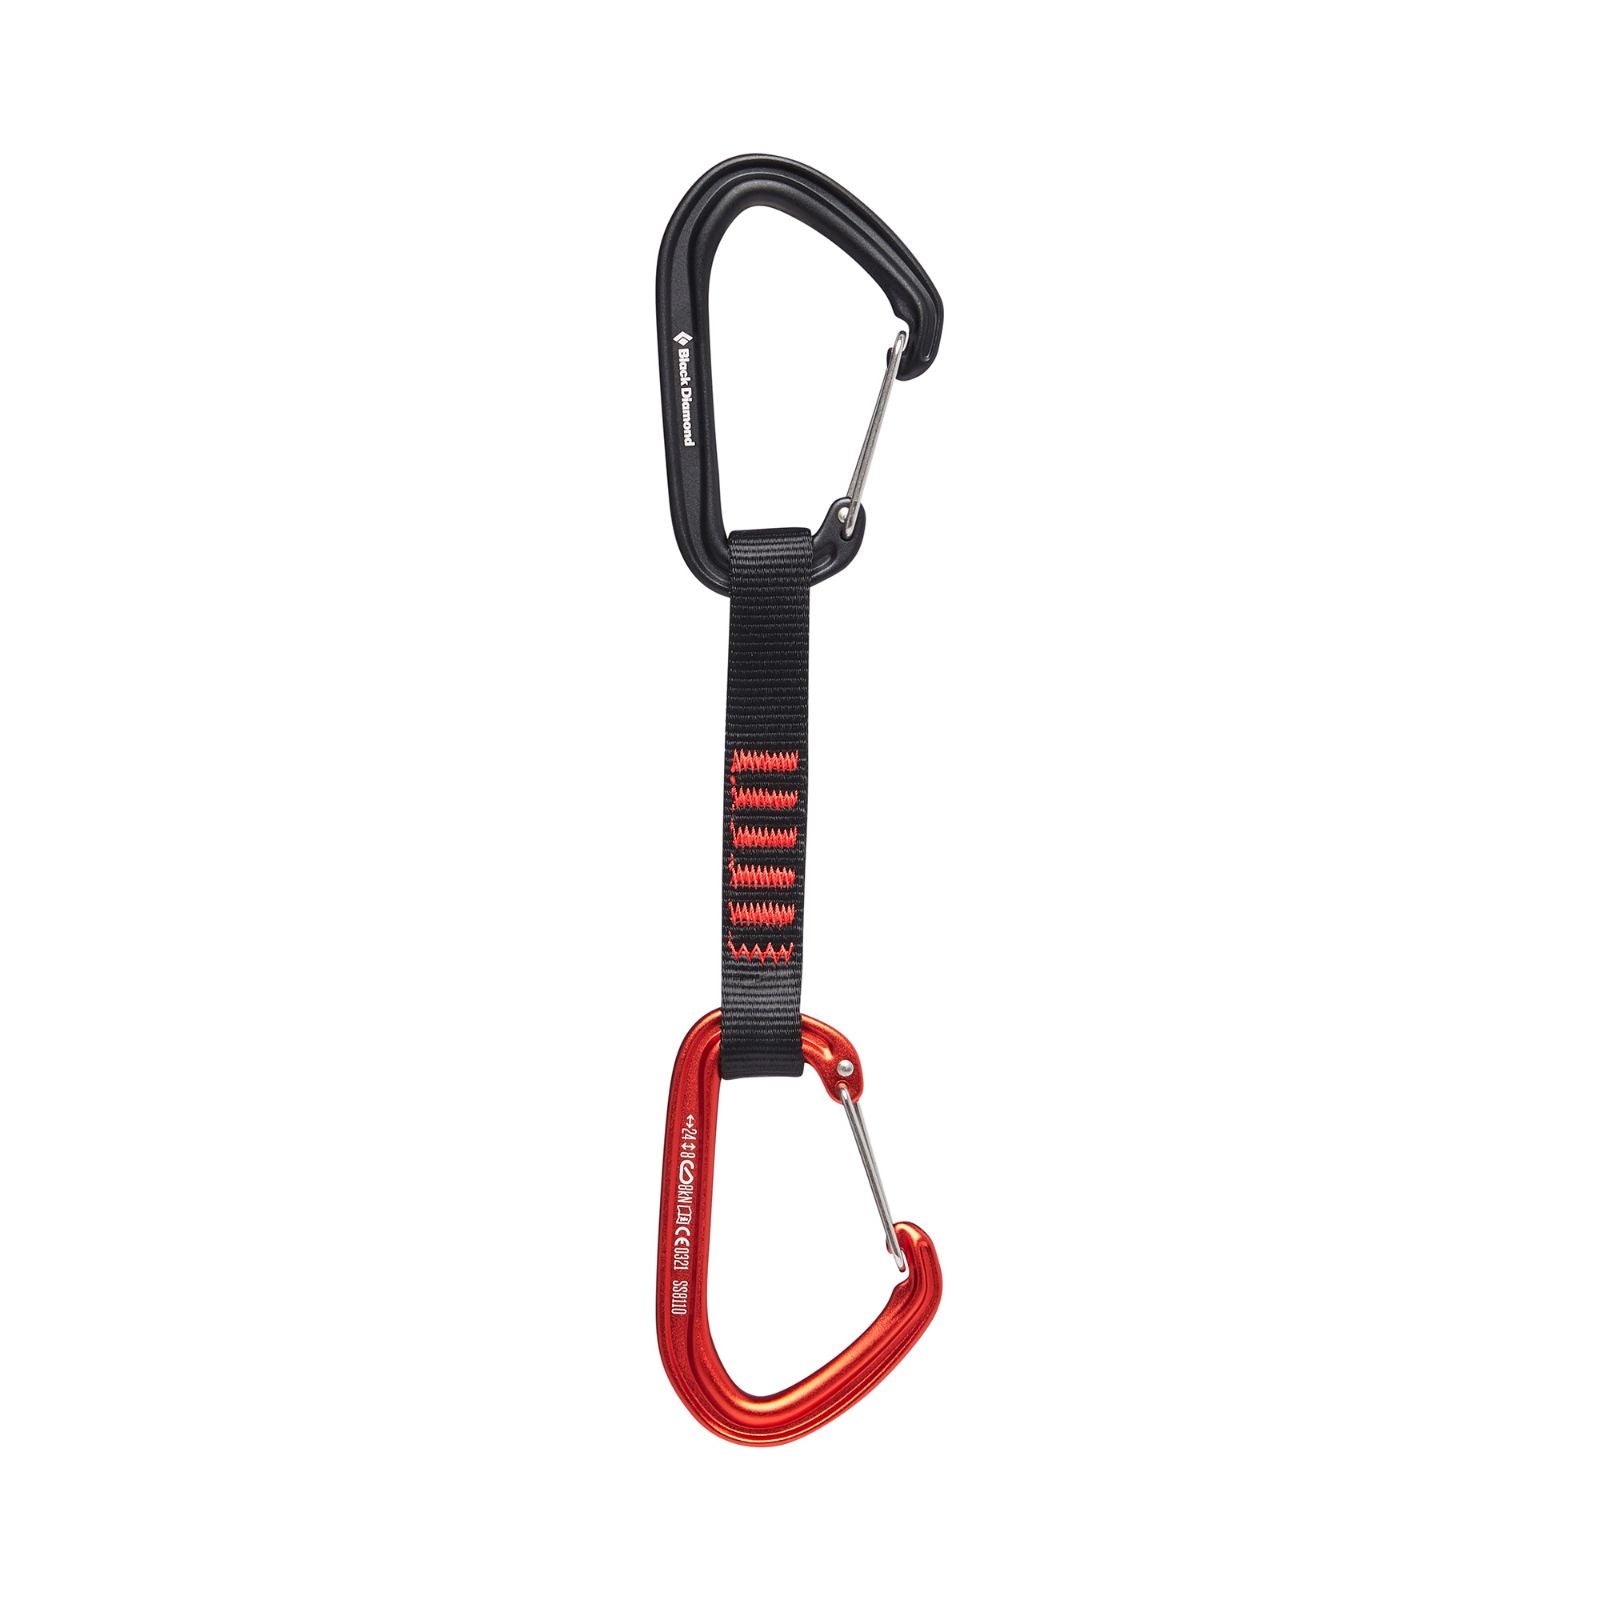 A six pack of Black Diamond's lightweight and highly adaptable quickdraw. This draw features the updated HotWire wiregate carabiners.